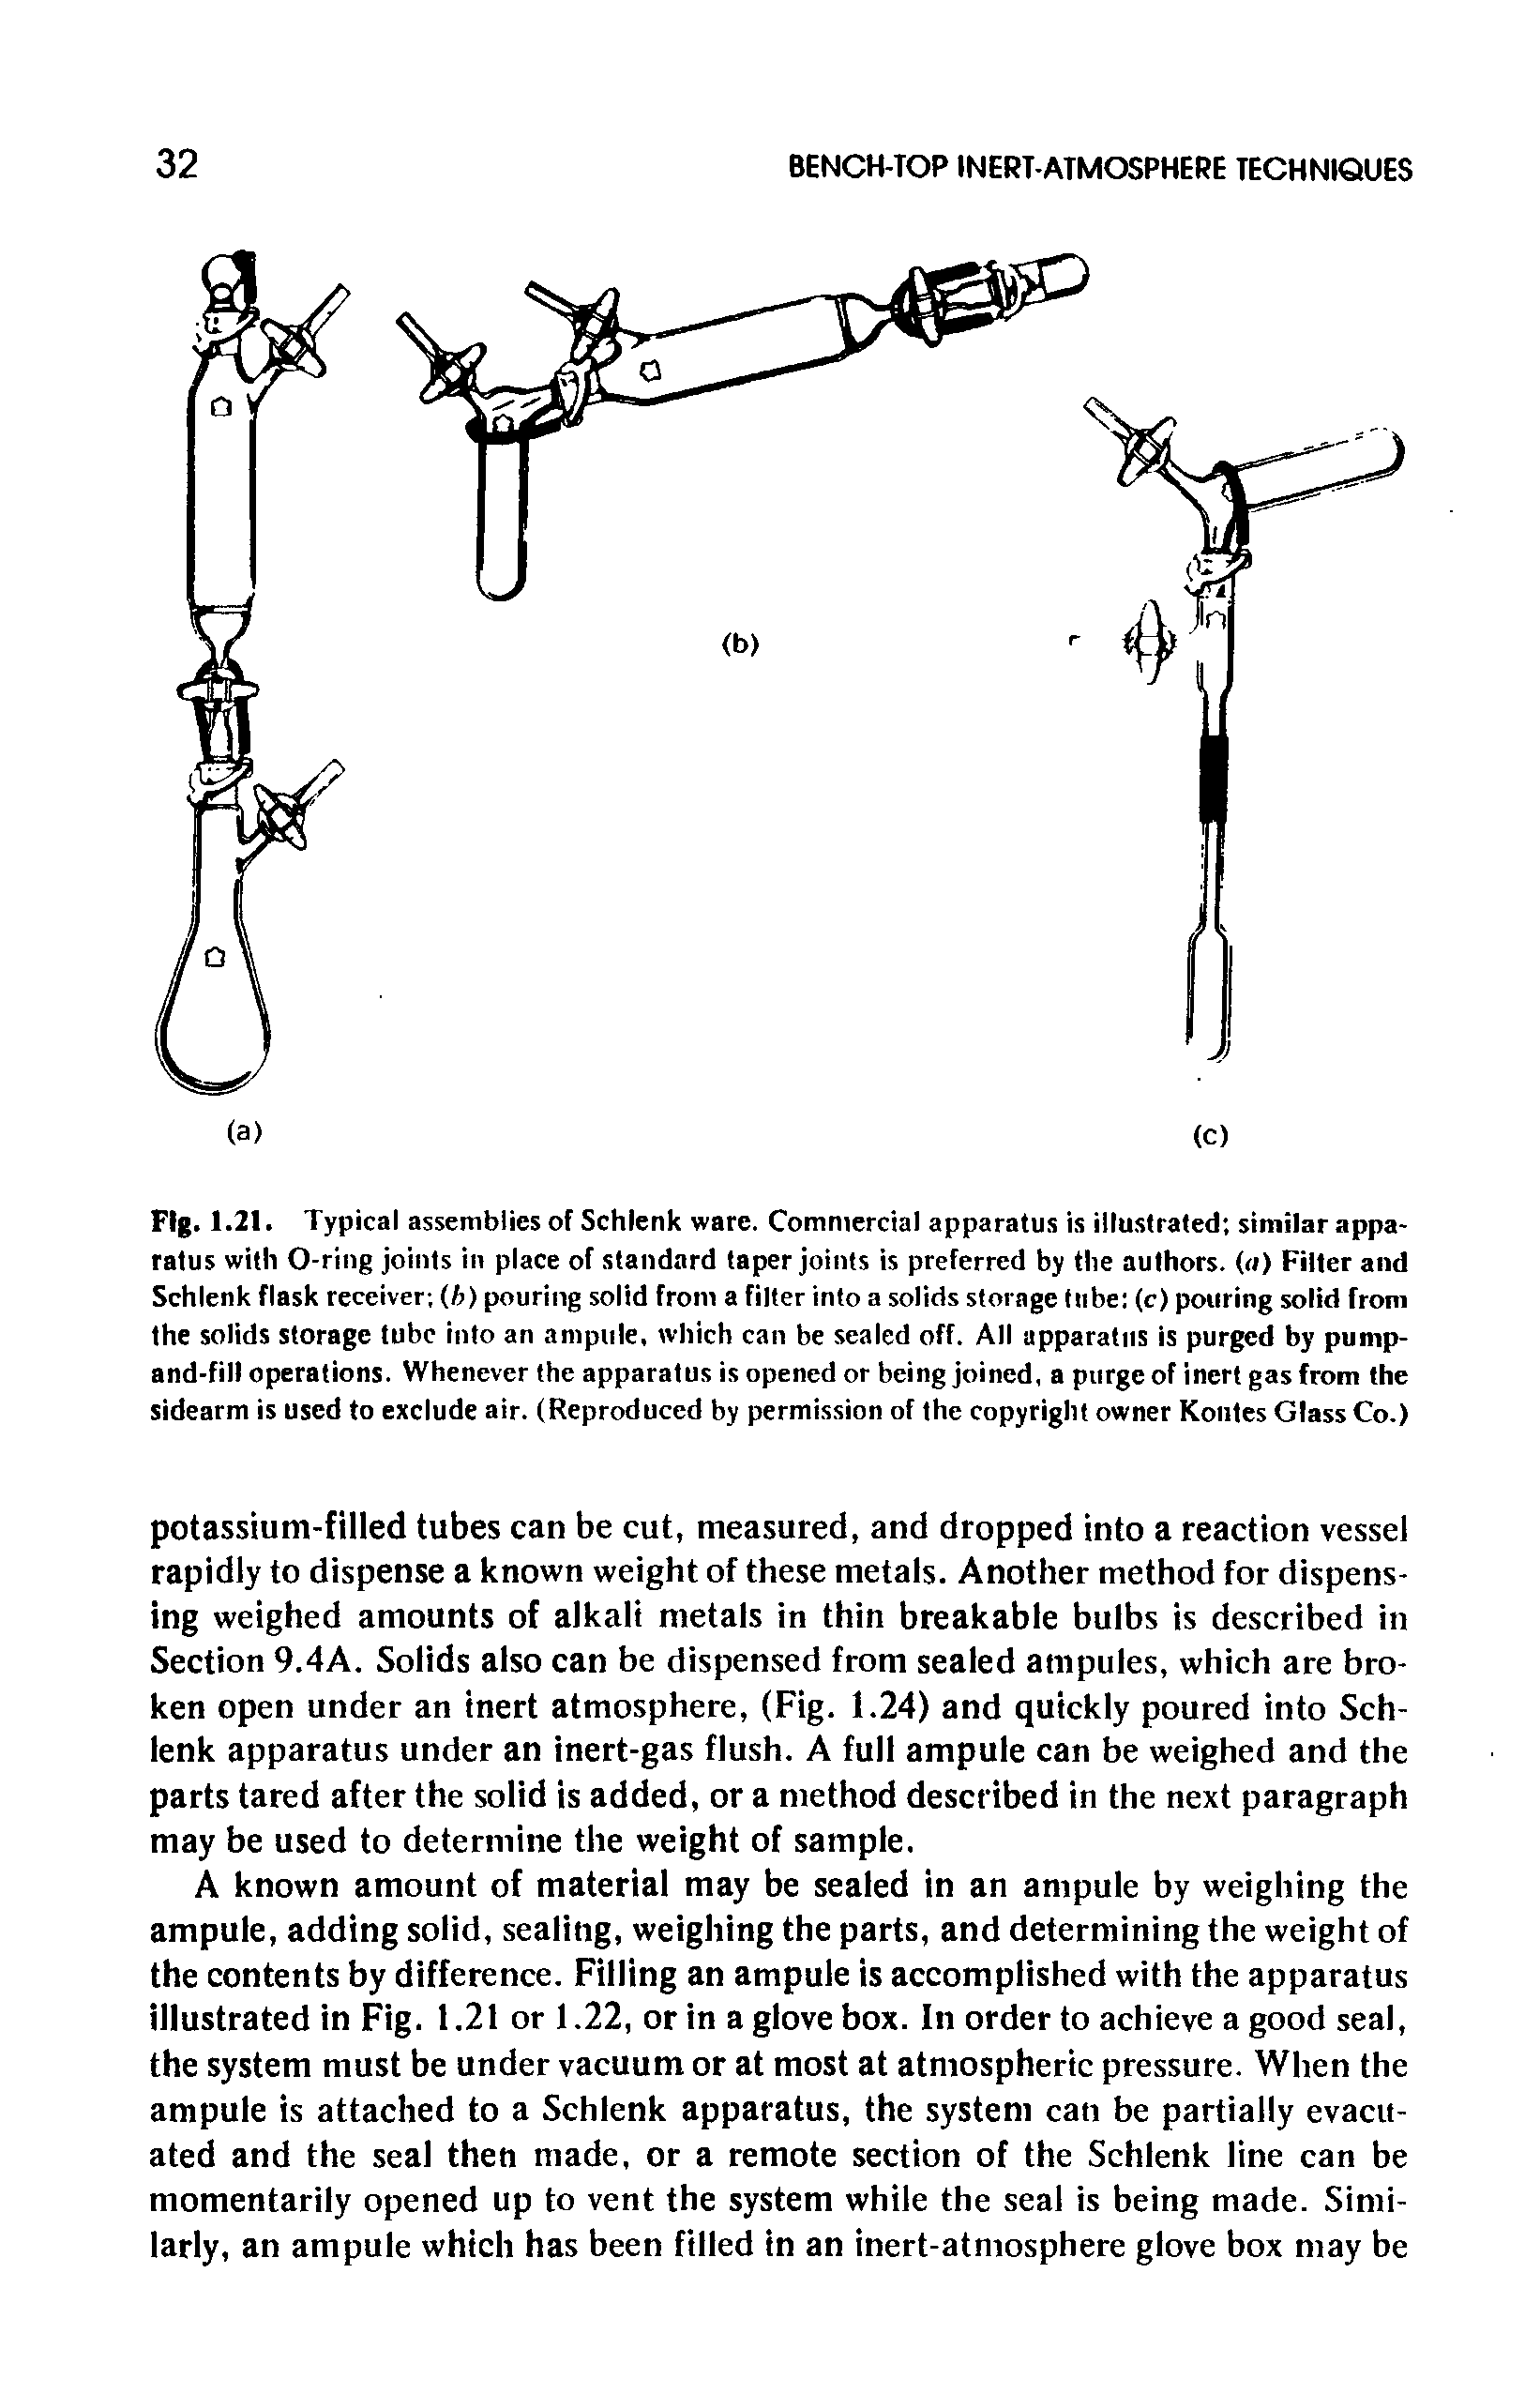 Fig. 1.21. Typical assemblies of Schlenk ware. Commercial apparatus is illustrated similar apparatus with O-ring joints in place of standard taper joints is preferred by the authors. (<i) Filter and Schlenk flask receiver (b) pouring solid from a filter into a solids storage tube (c) pouring solid from the solids storage tube into an ampule, which can be sealed off. All apparatus is purged by pump-and-fill operations. Whenever the apparatus is opened or being joined, a purge of inert gas from the sidearm is used to exclude air. (Reproduced by permission of the copyright owner Koutes Glass Co.)...